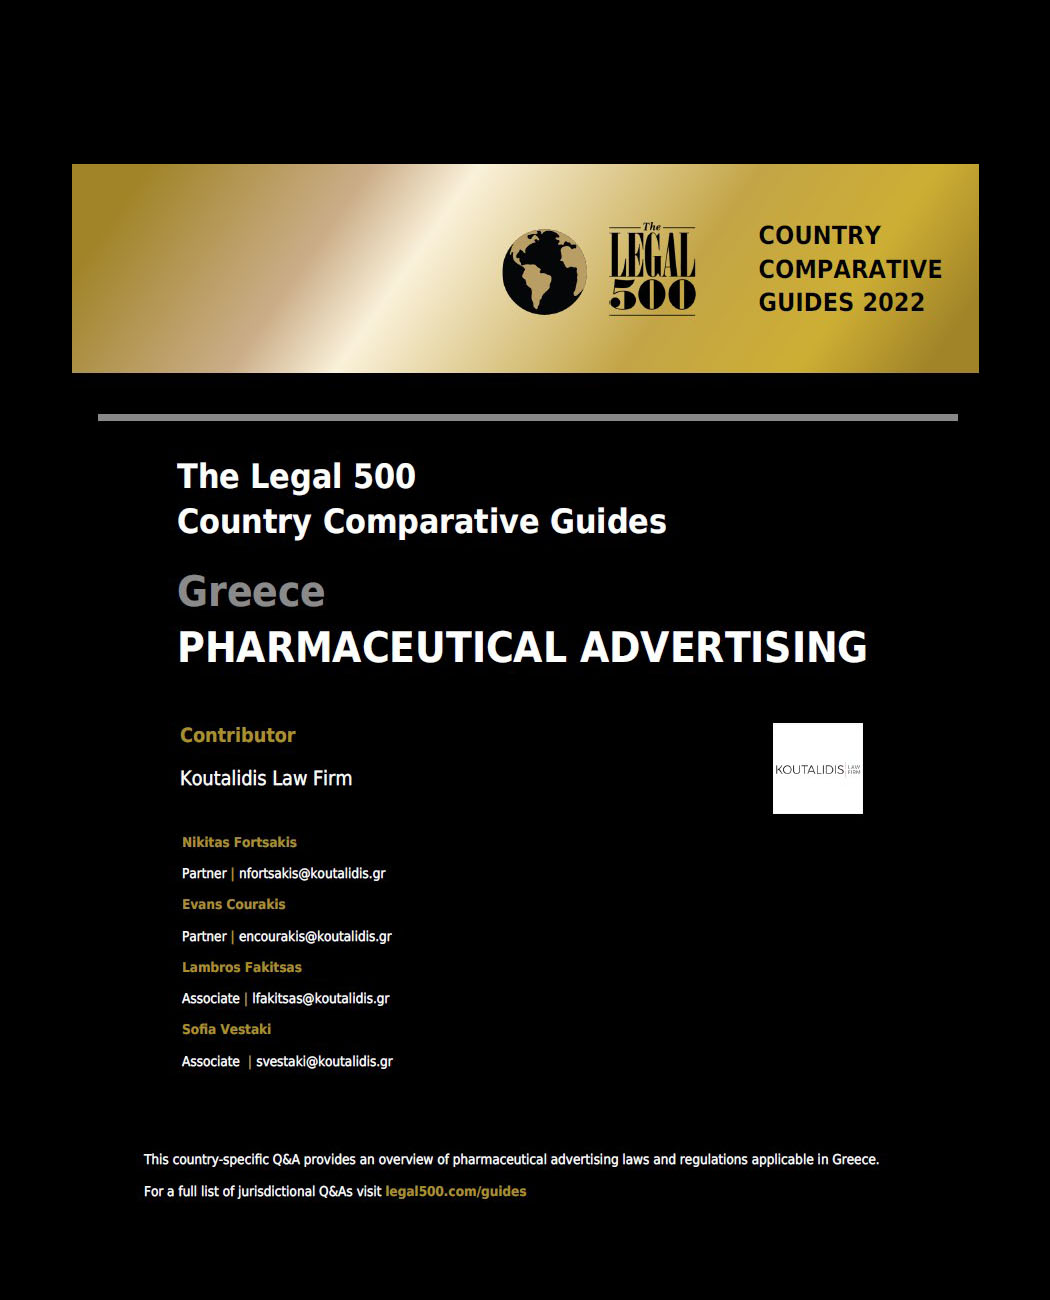 The Legal 500 Pharmaceutical Advertising laws